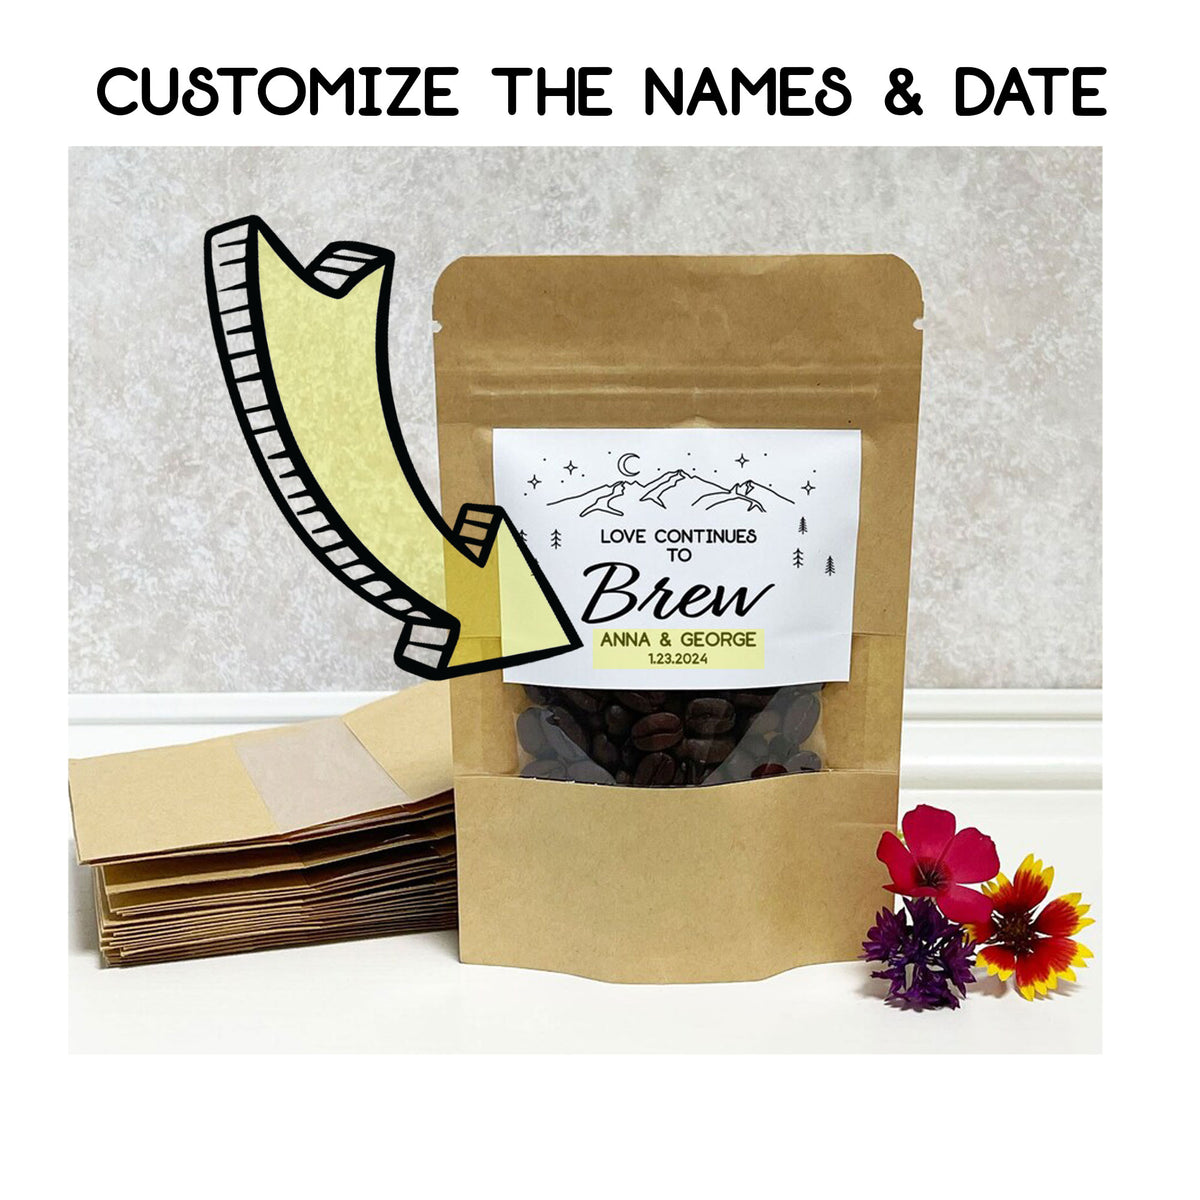 Love Continues to Brew Party Favor Bags